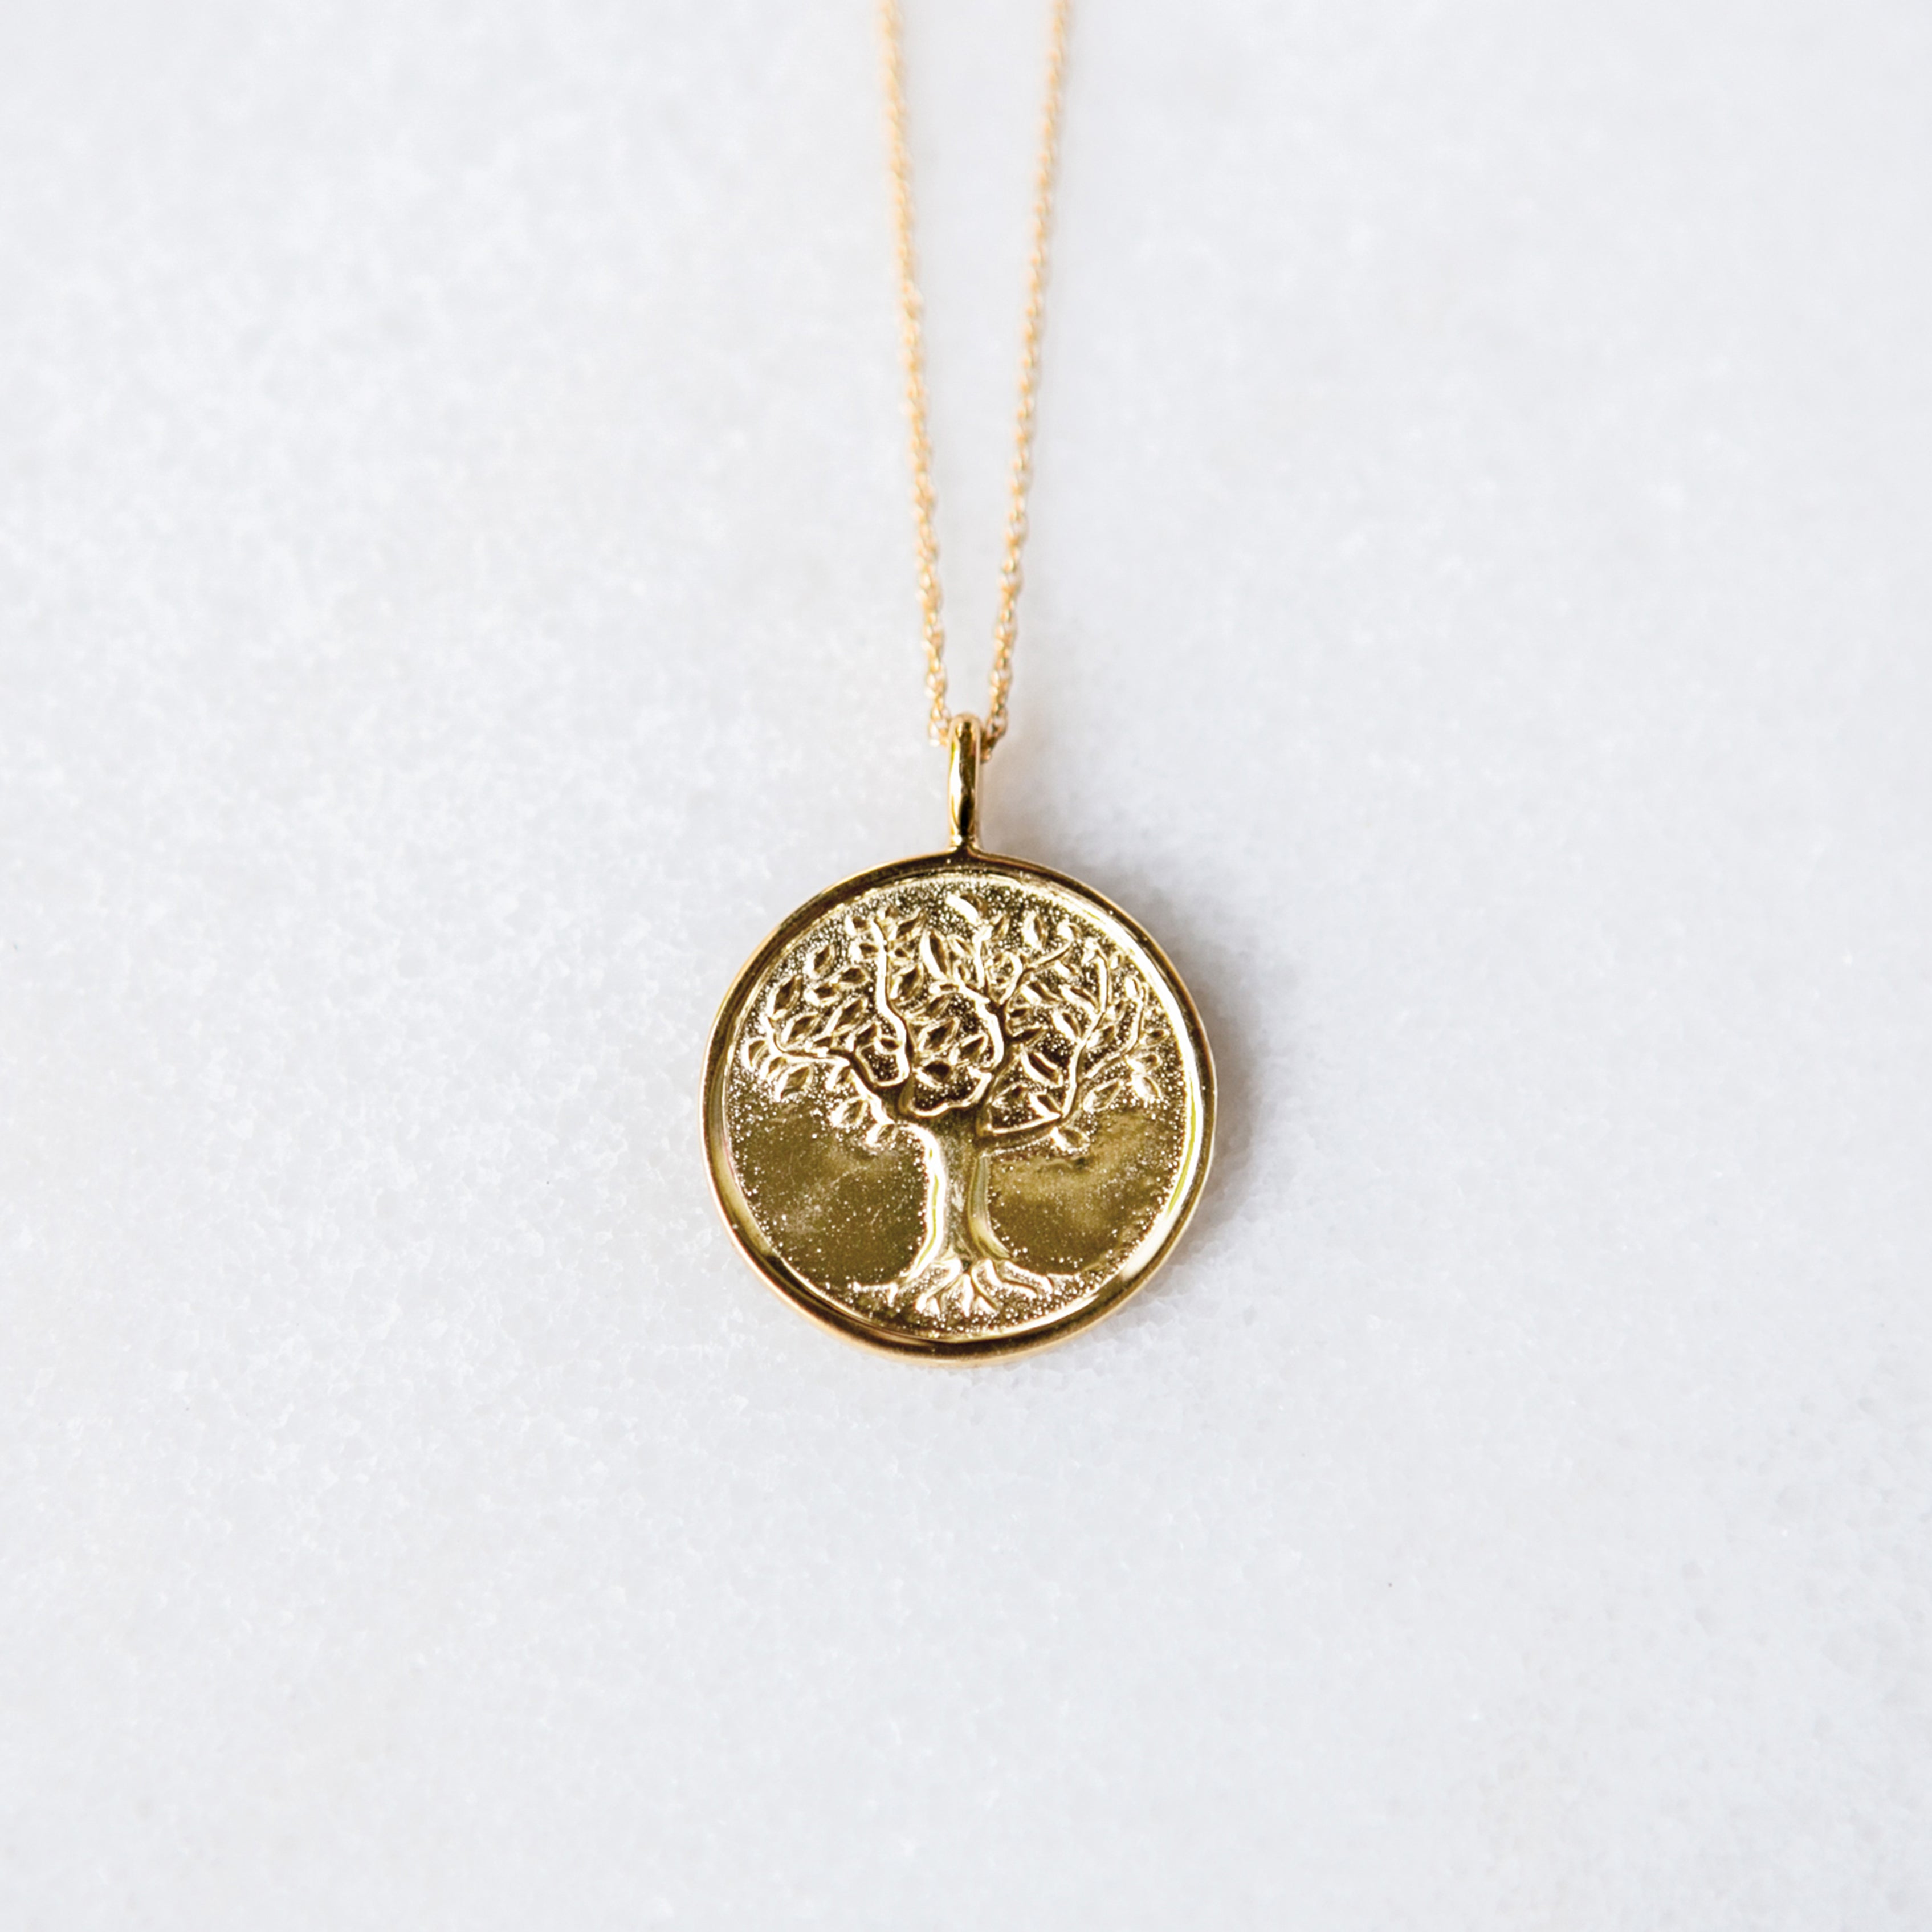 Tree Of Life Jewelry Meaning - Time & Treasures